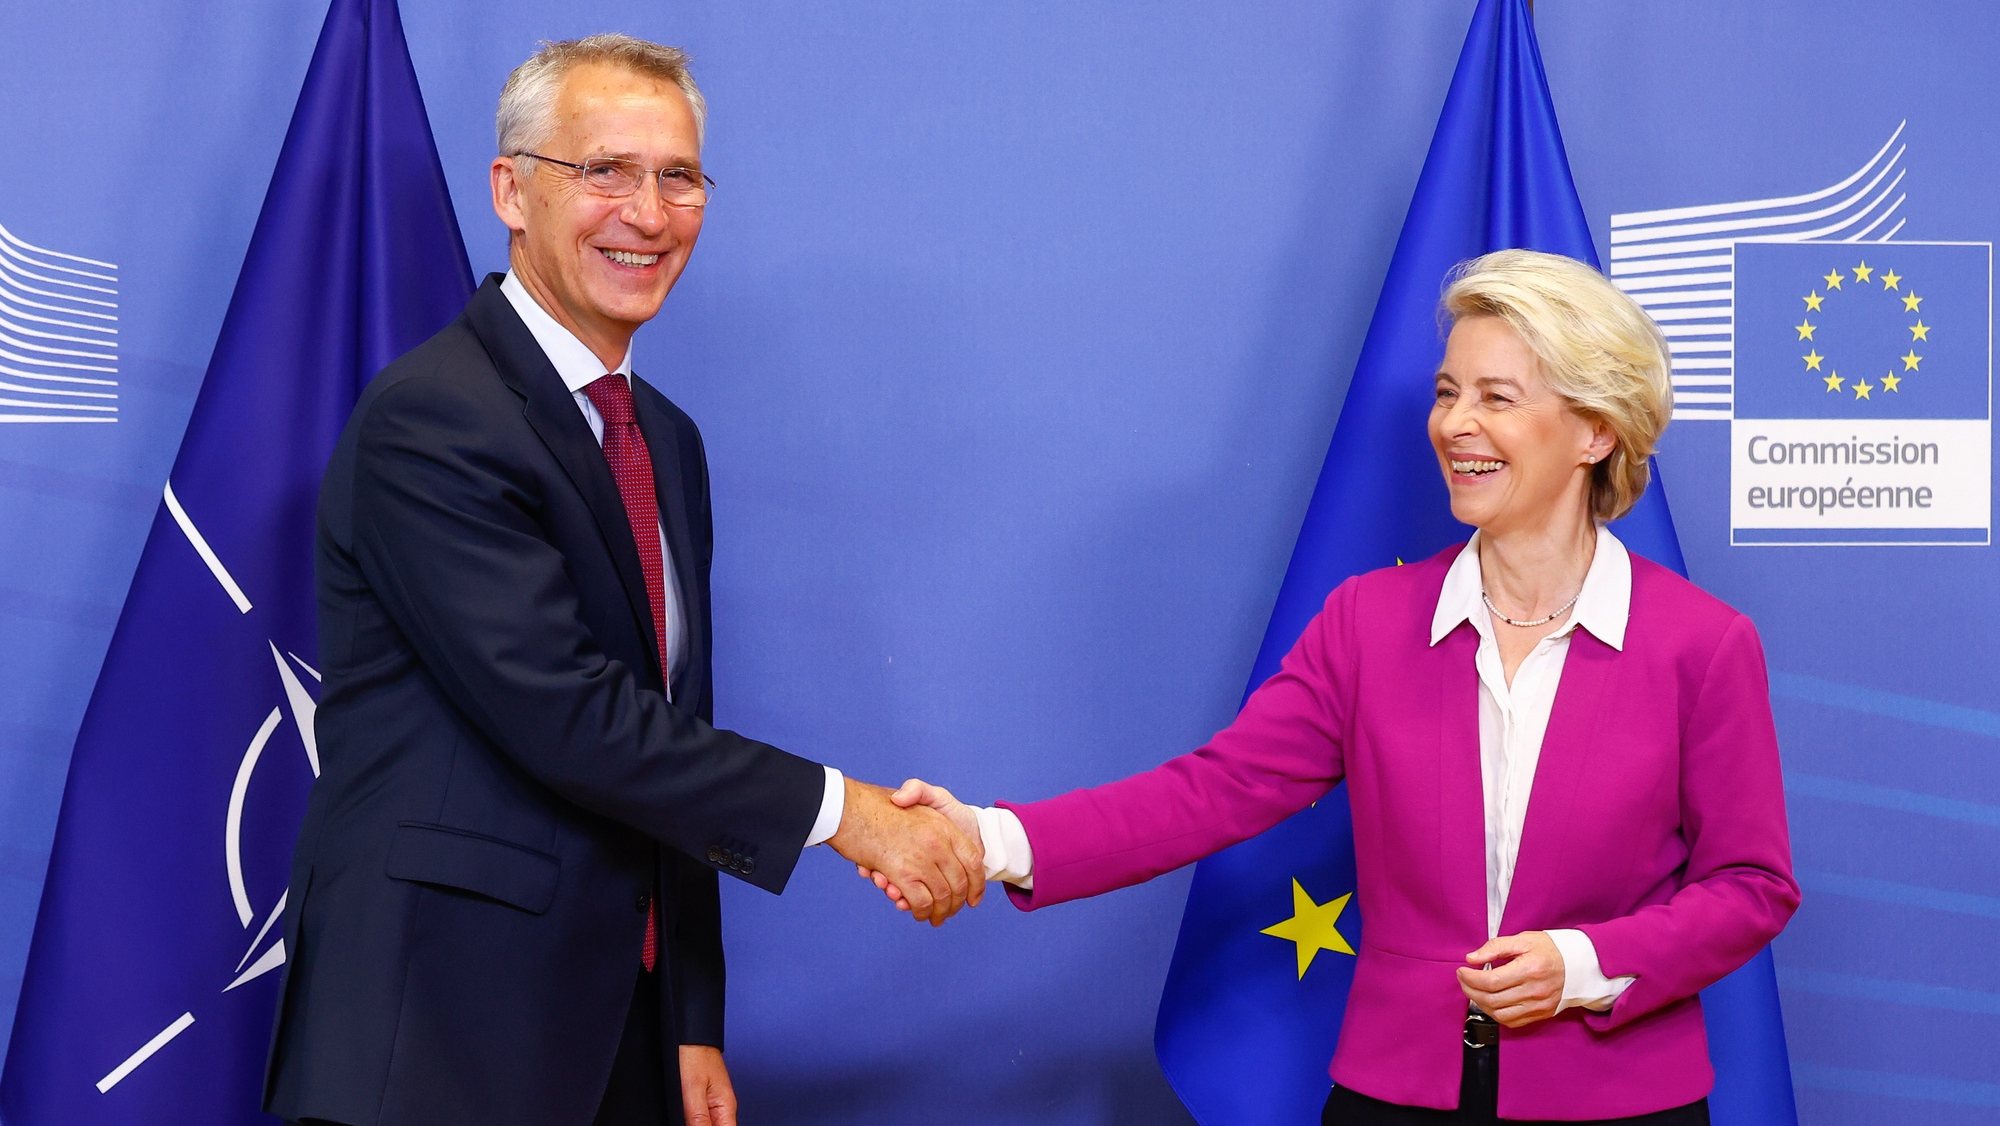 epa10207461 NATO Secretary General Jens Stoltenberg is welcomed by European Commission President Ursula von der Leyen ahead of a meeting at the European Commission in Brussels, Belgium, 26 September 2022.  EPA/STEPHANIE LECOCQ